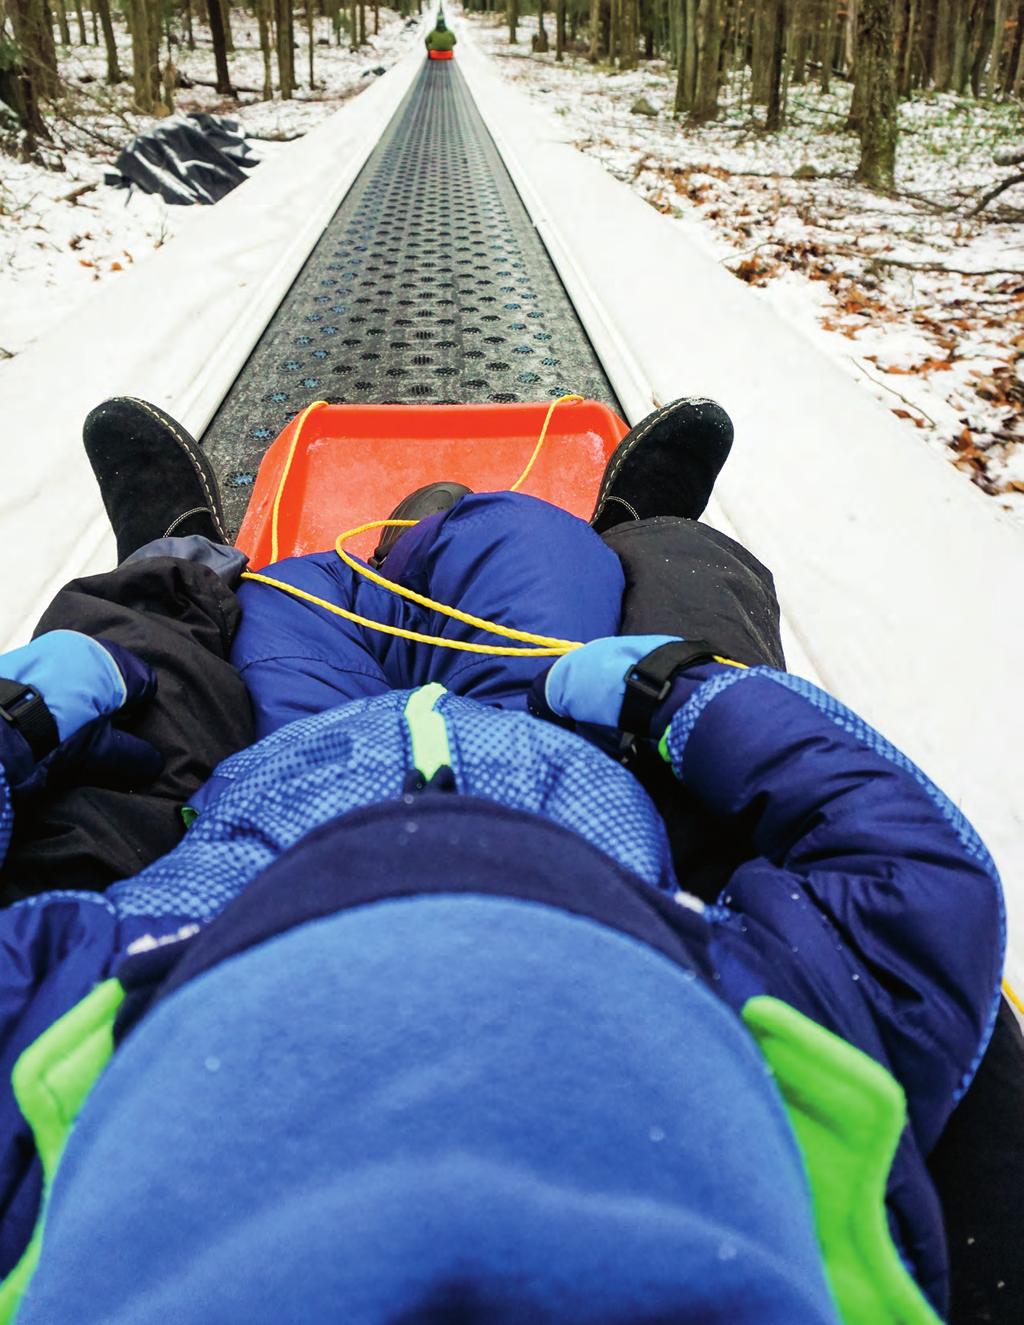 SMOOTH SLEDDING Blackwater Falls State Park takes the work out of a favorite